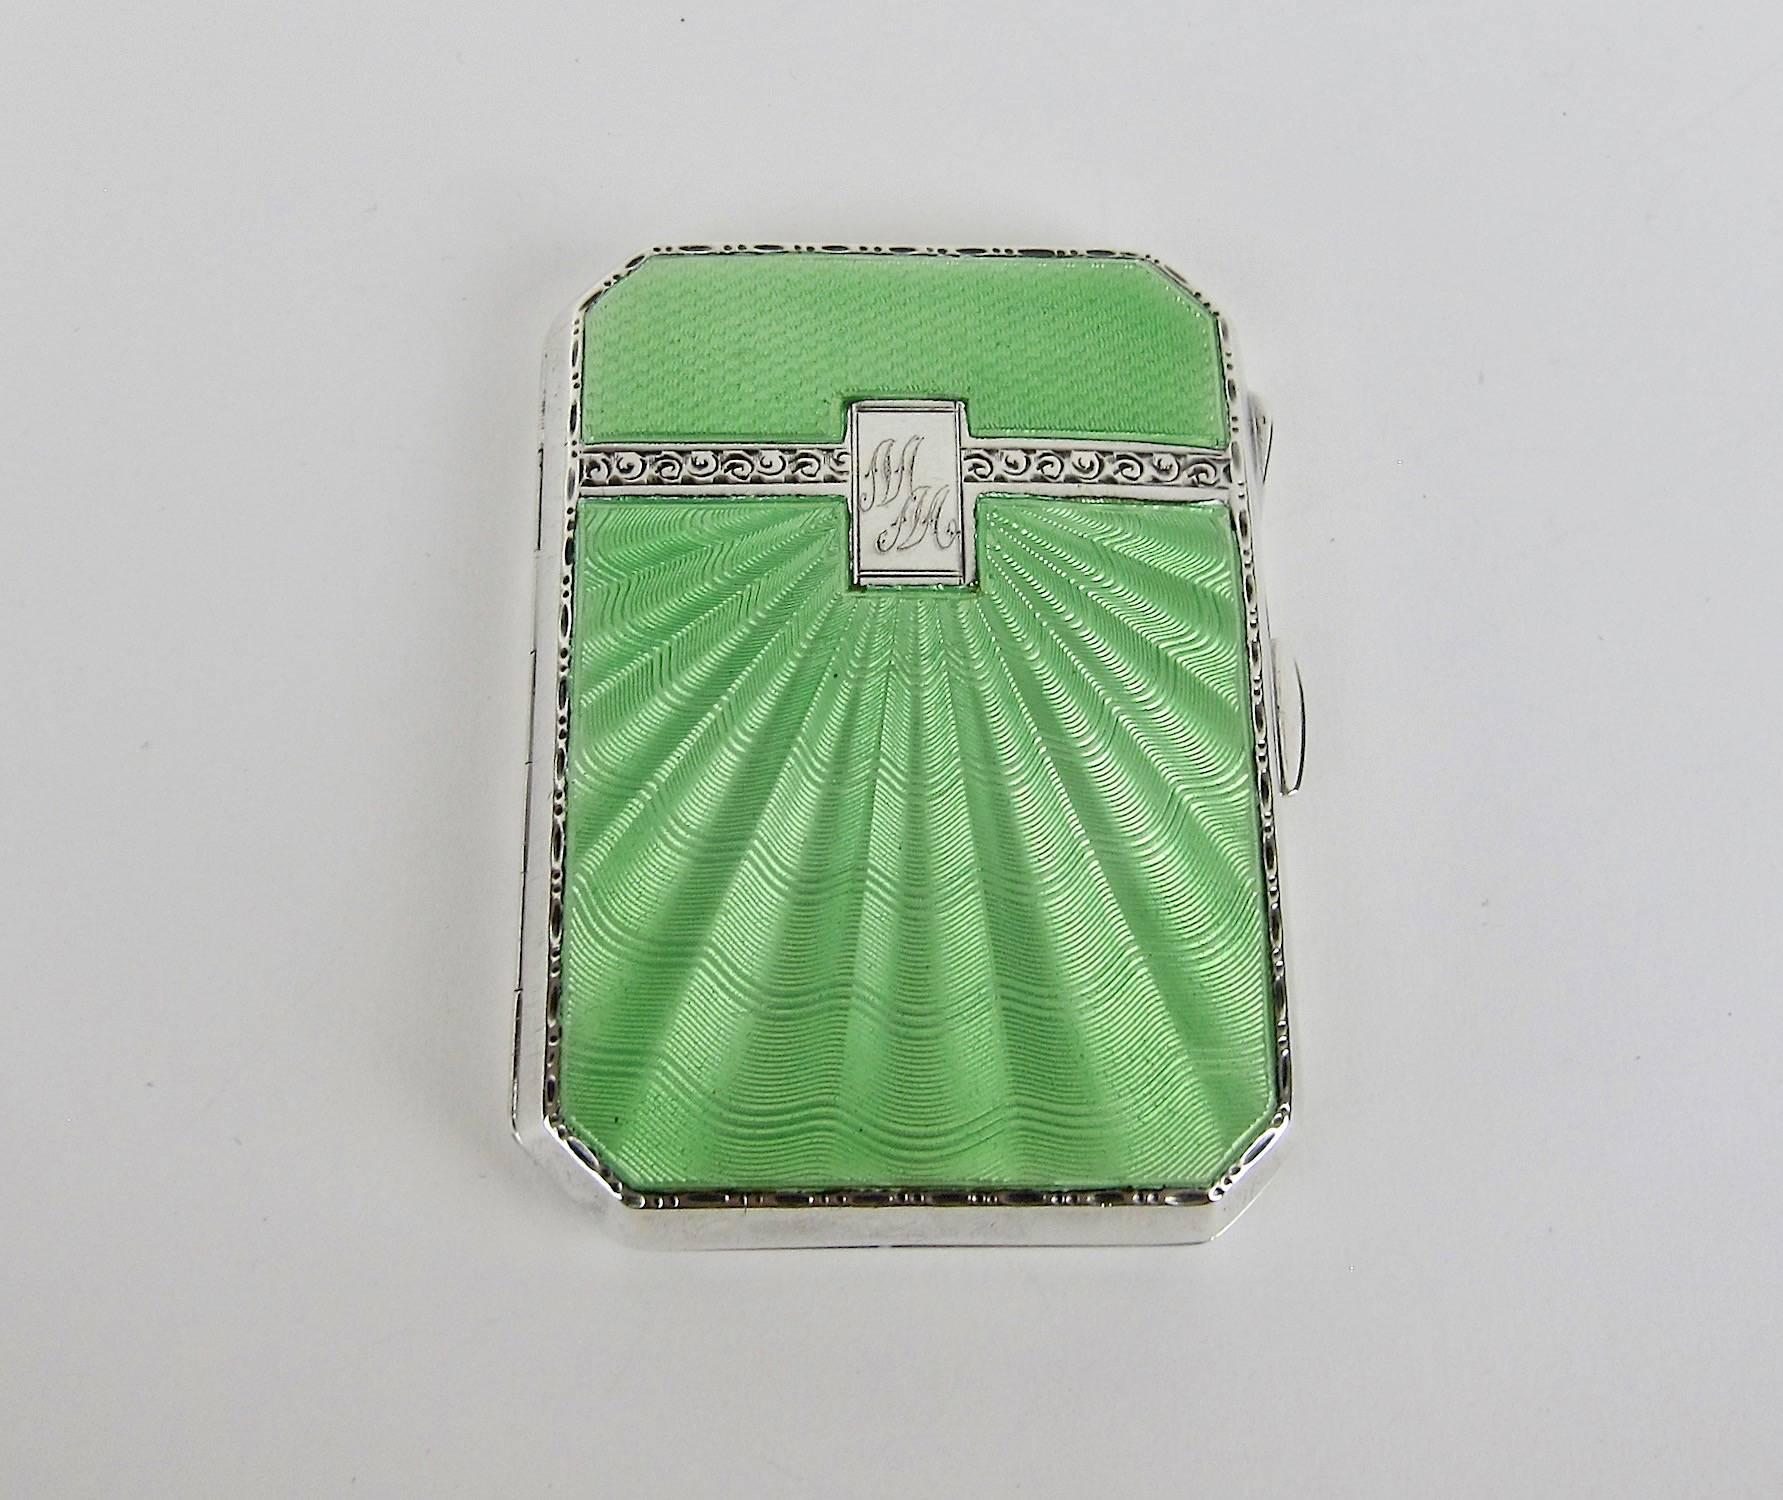 Enameled Art Deco Sterling Silver and Guilloche Enamel Cigarette Case by Joseph Gloster